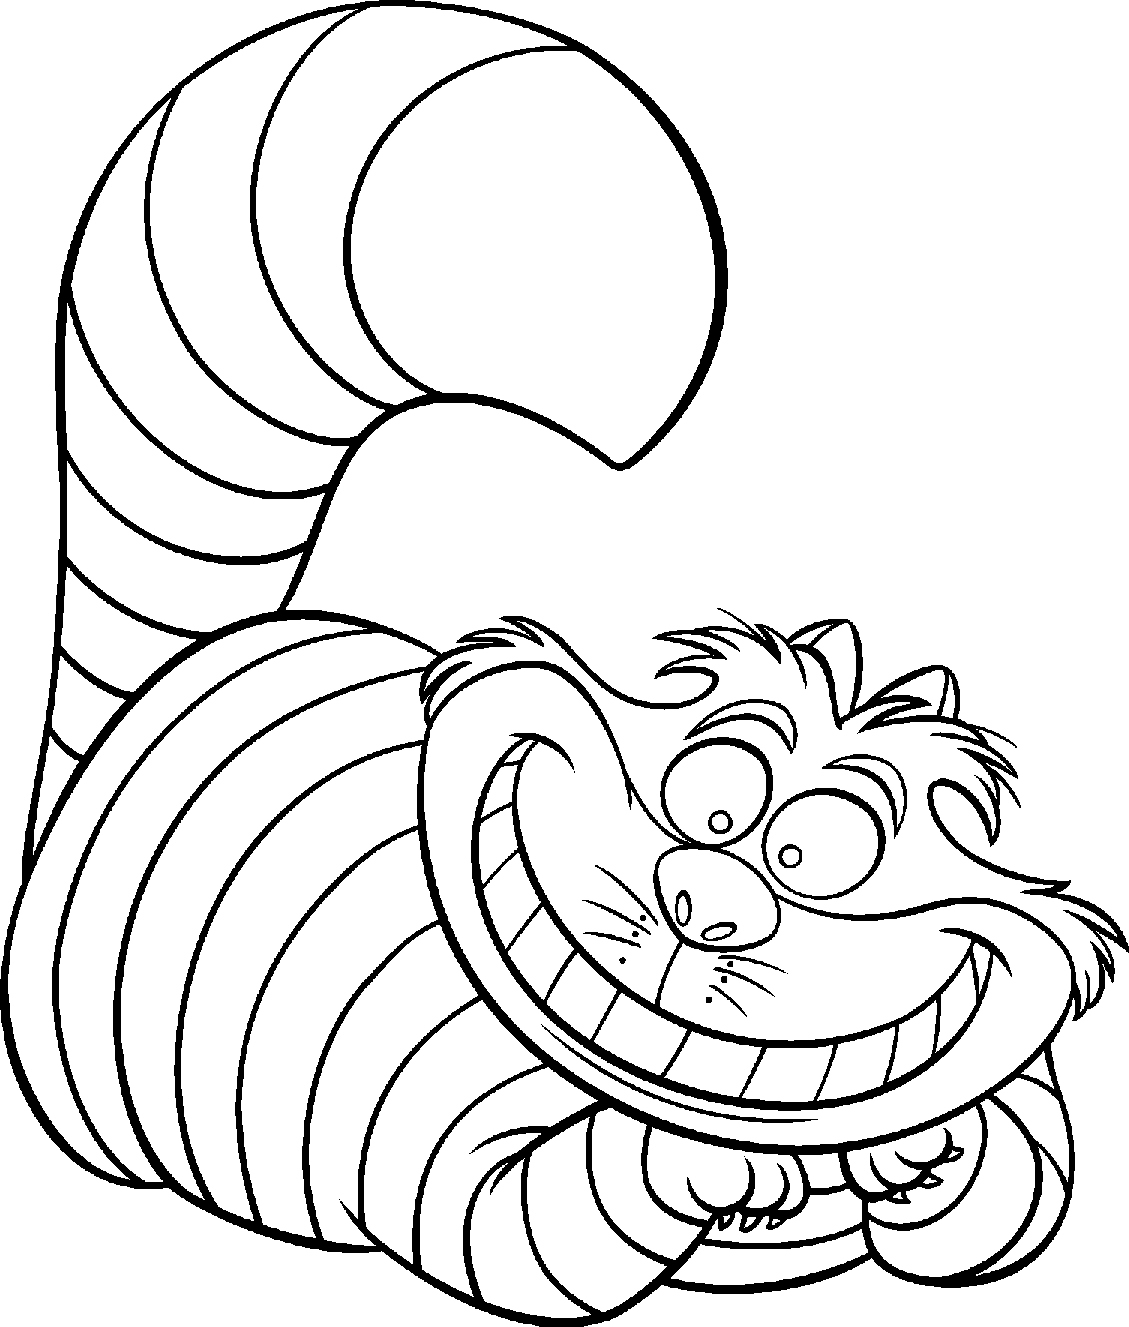 18+ Funny Coloring Pages - HowardXinyang